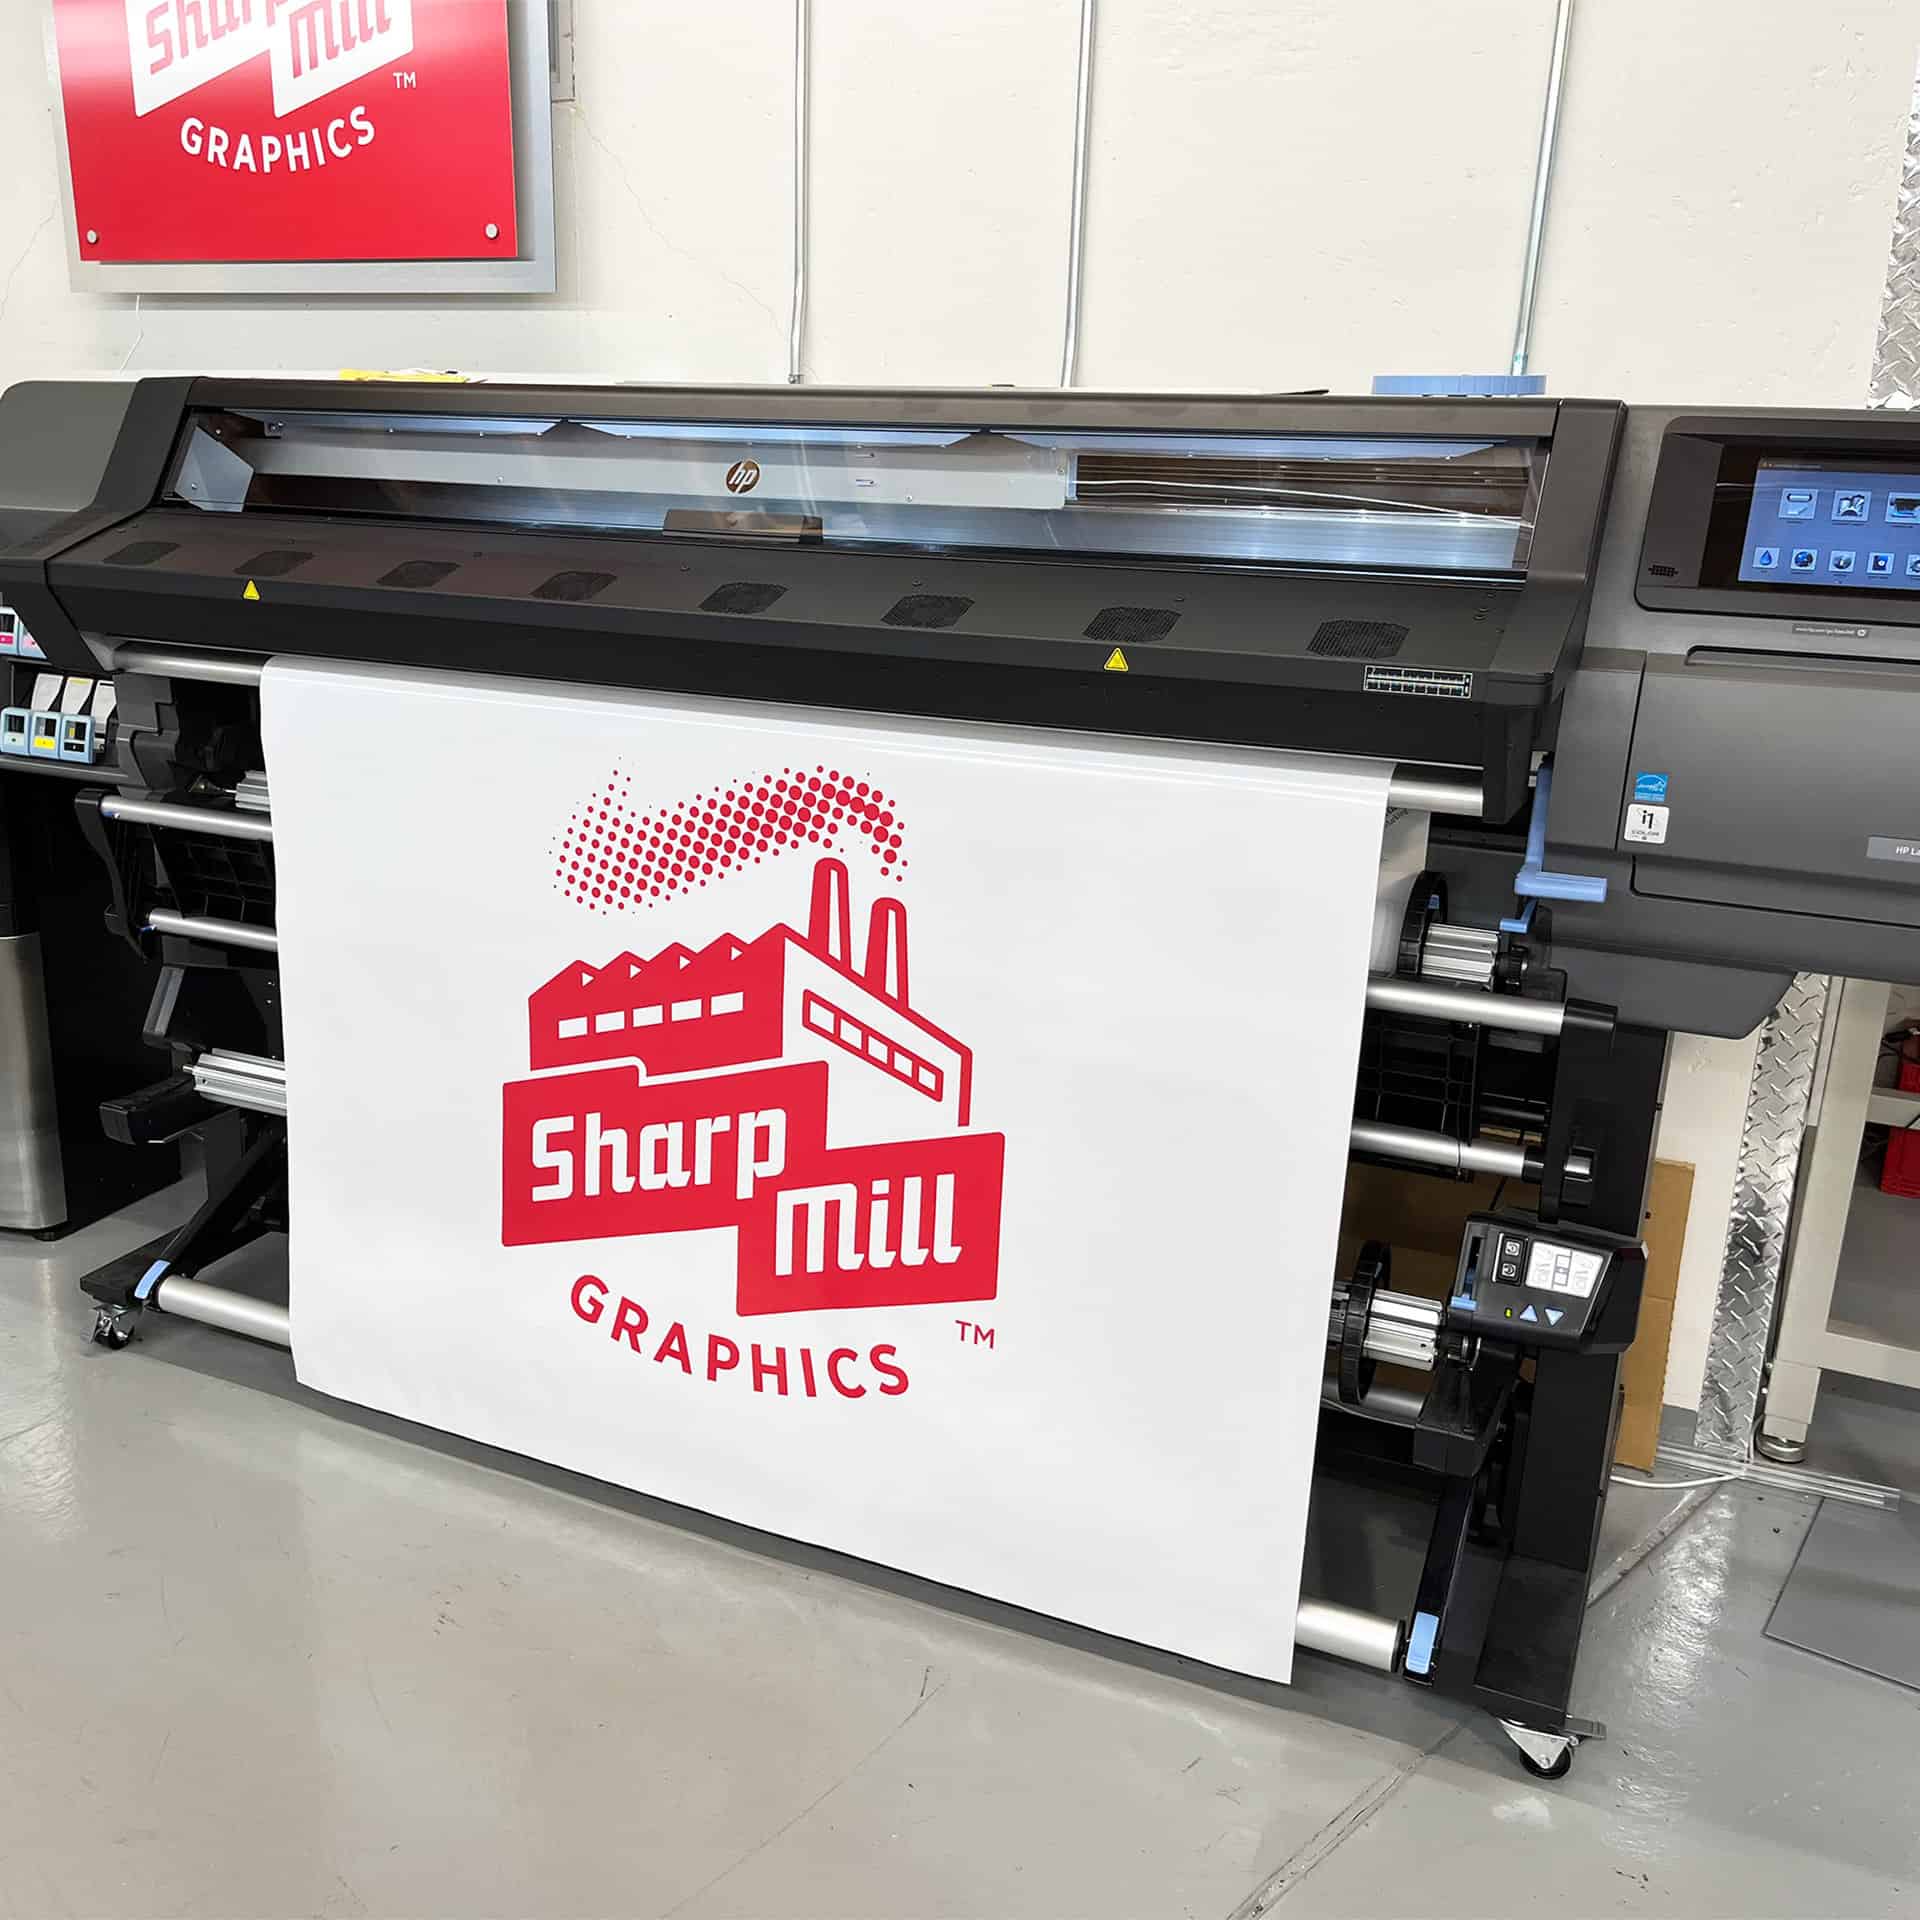 High-quality commercial printing with sharp mill graphics.